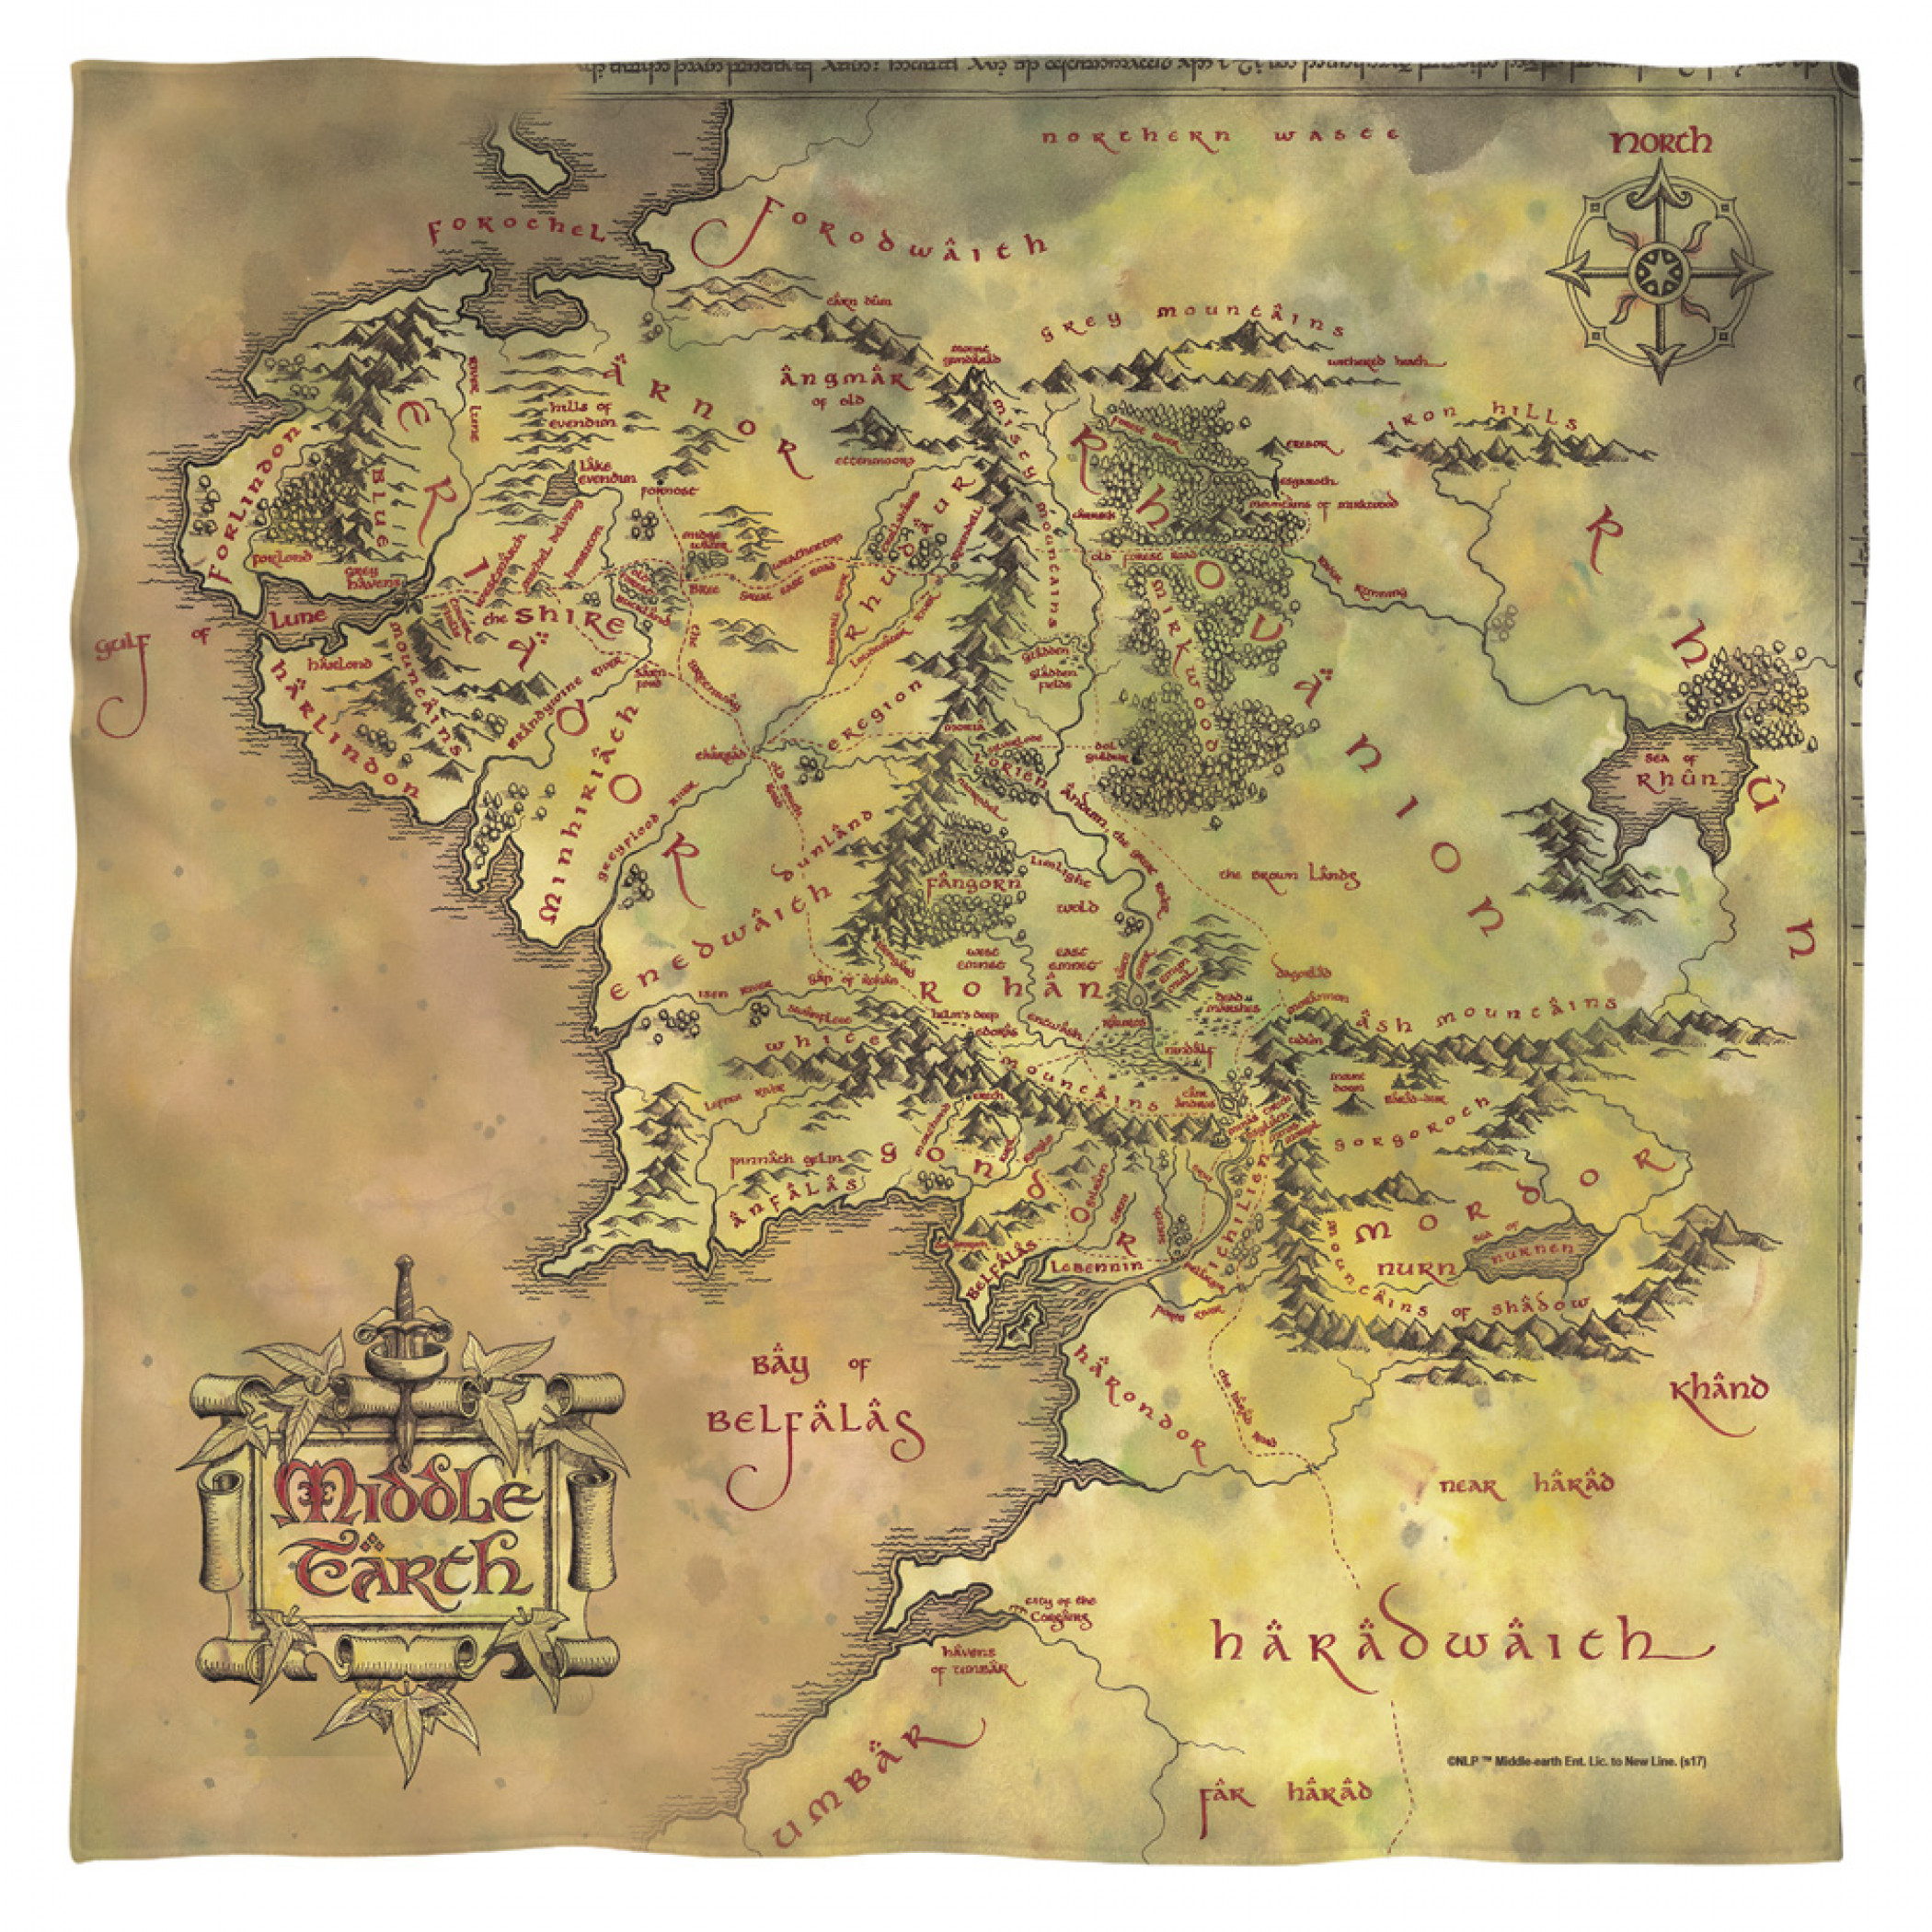 Lord of the Rings Middle Earth Map Bandana